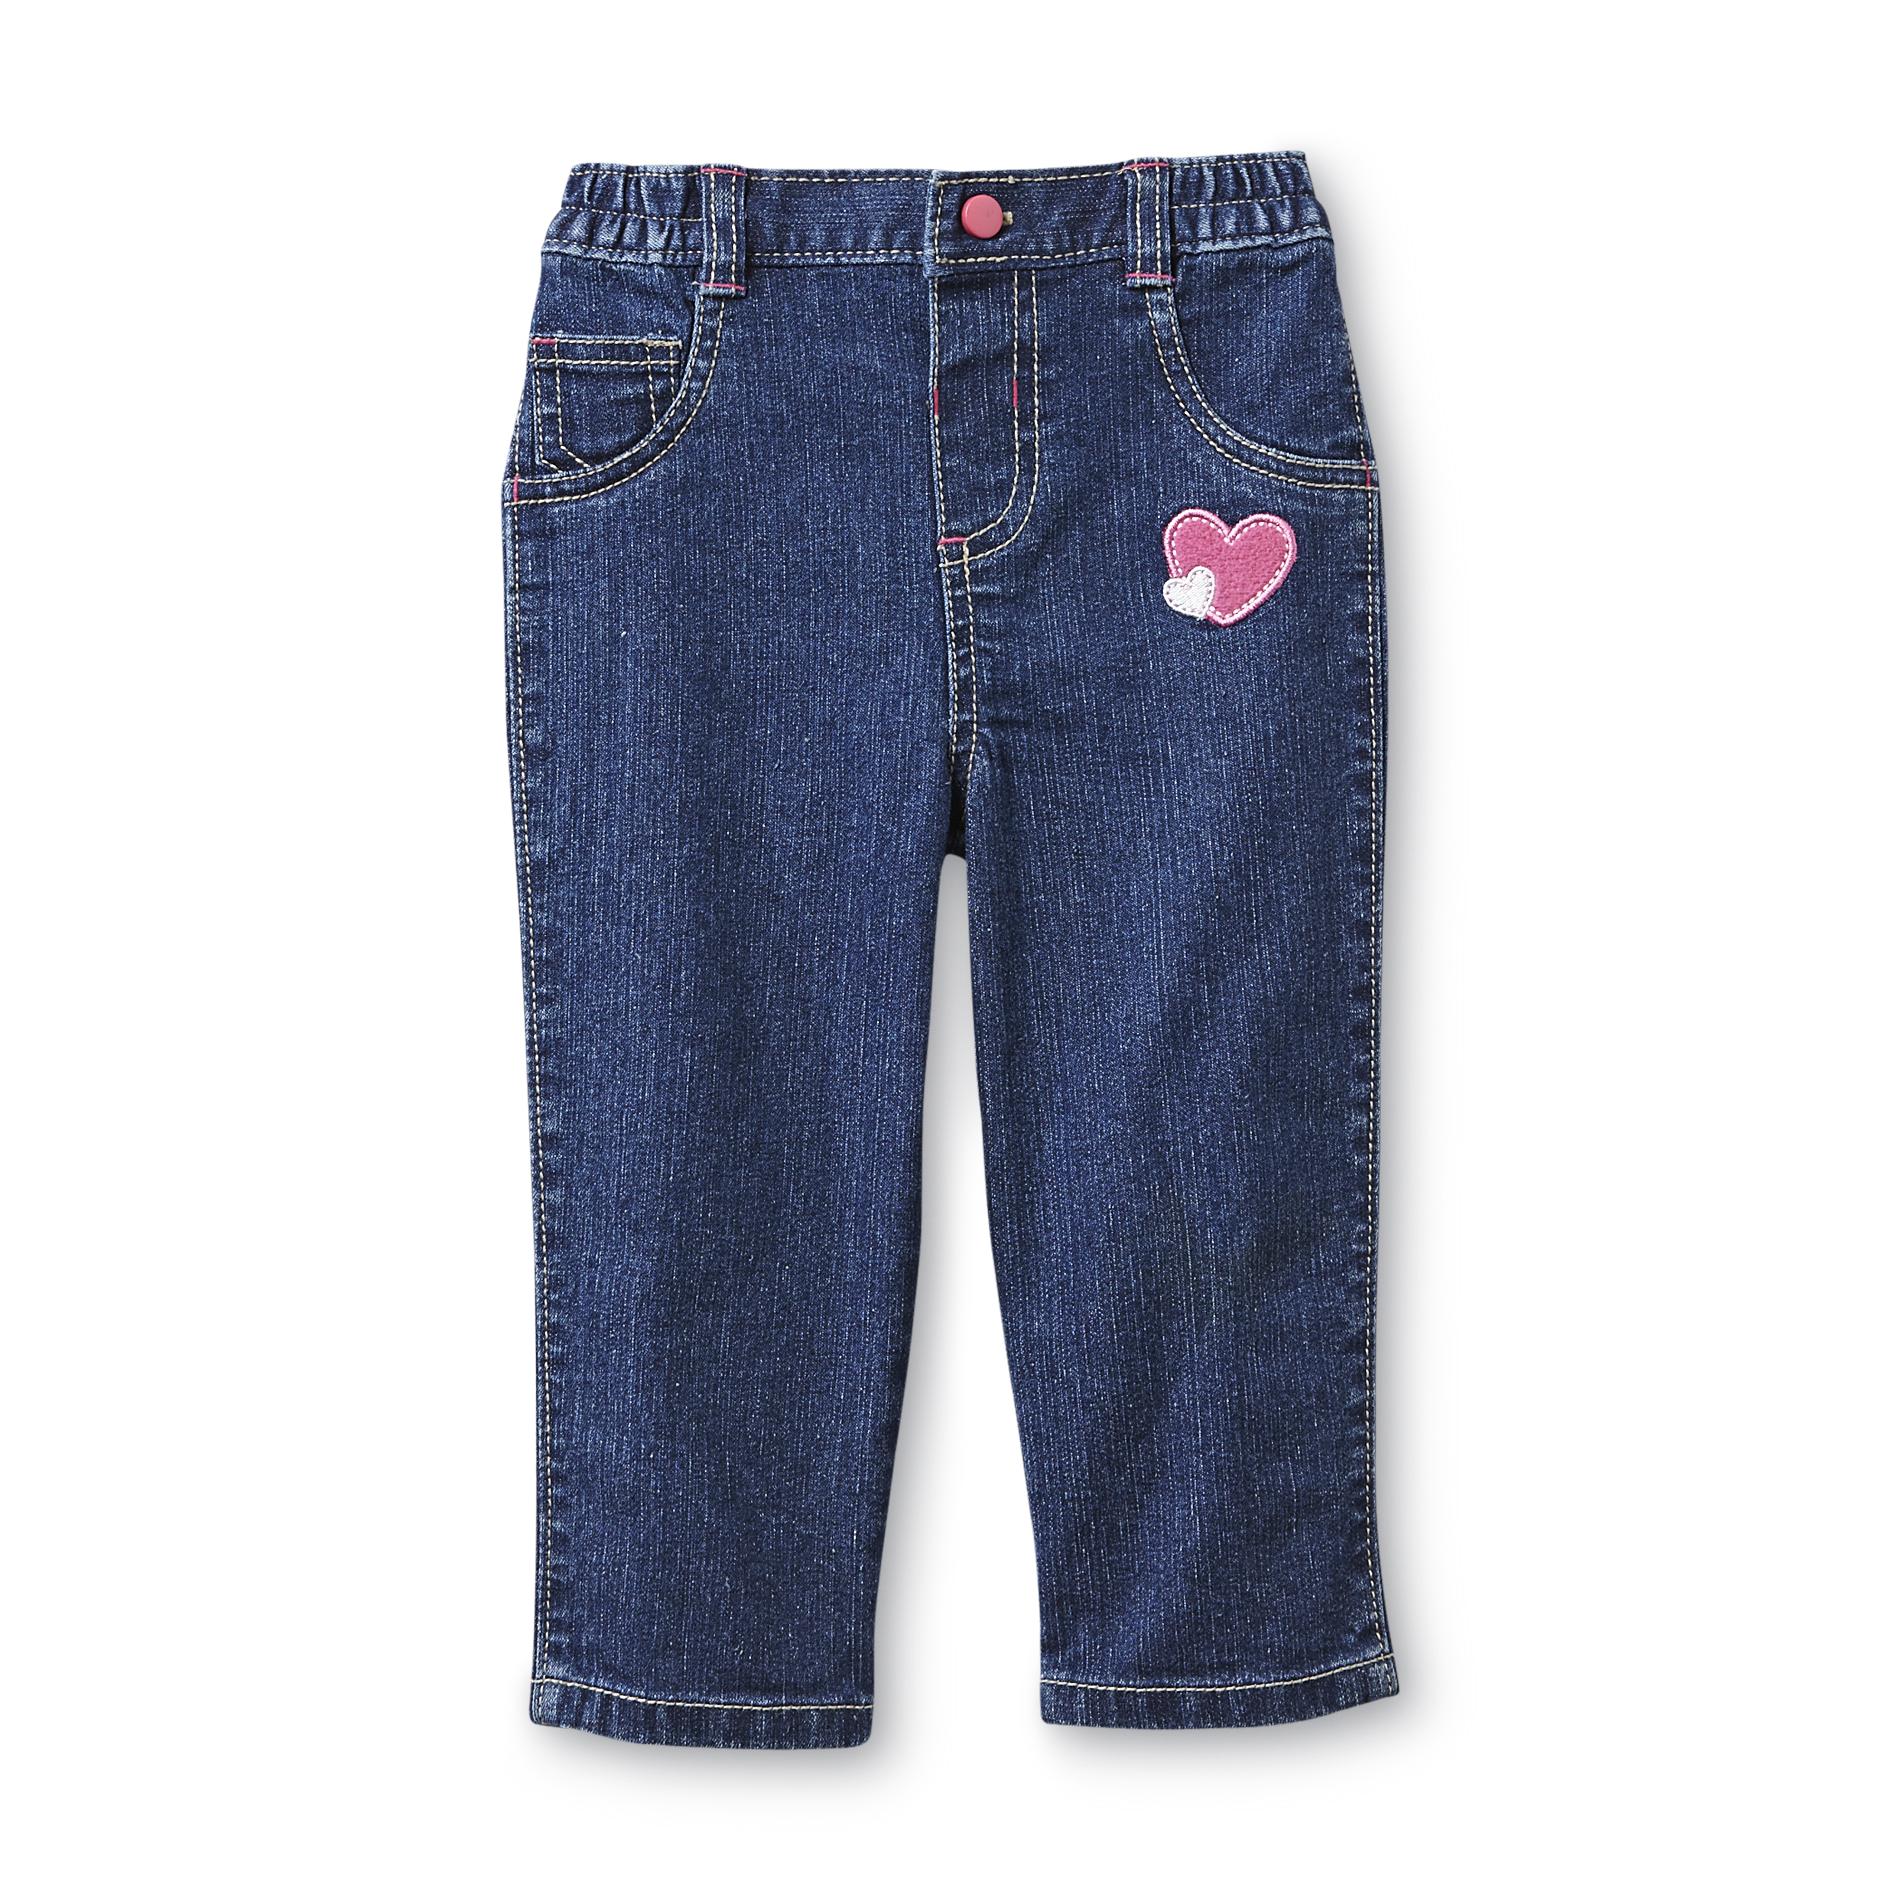 Small Wonders Infant Girl's Embroidered Jeans - Hearts